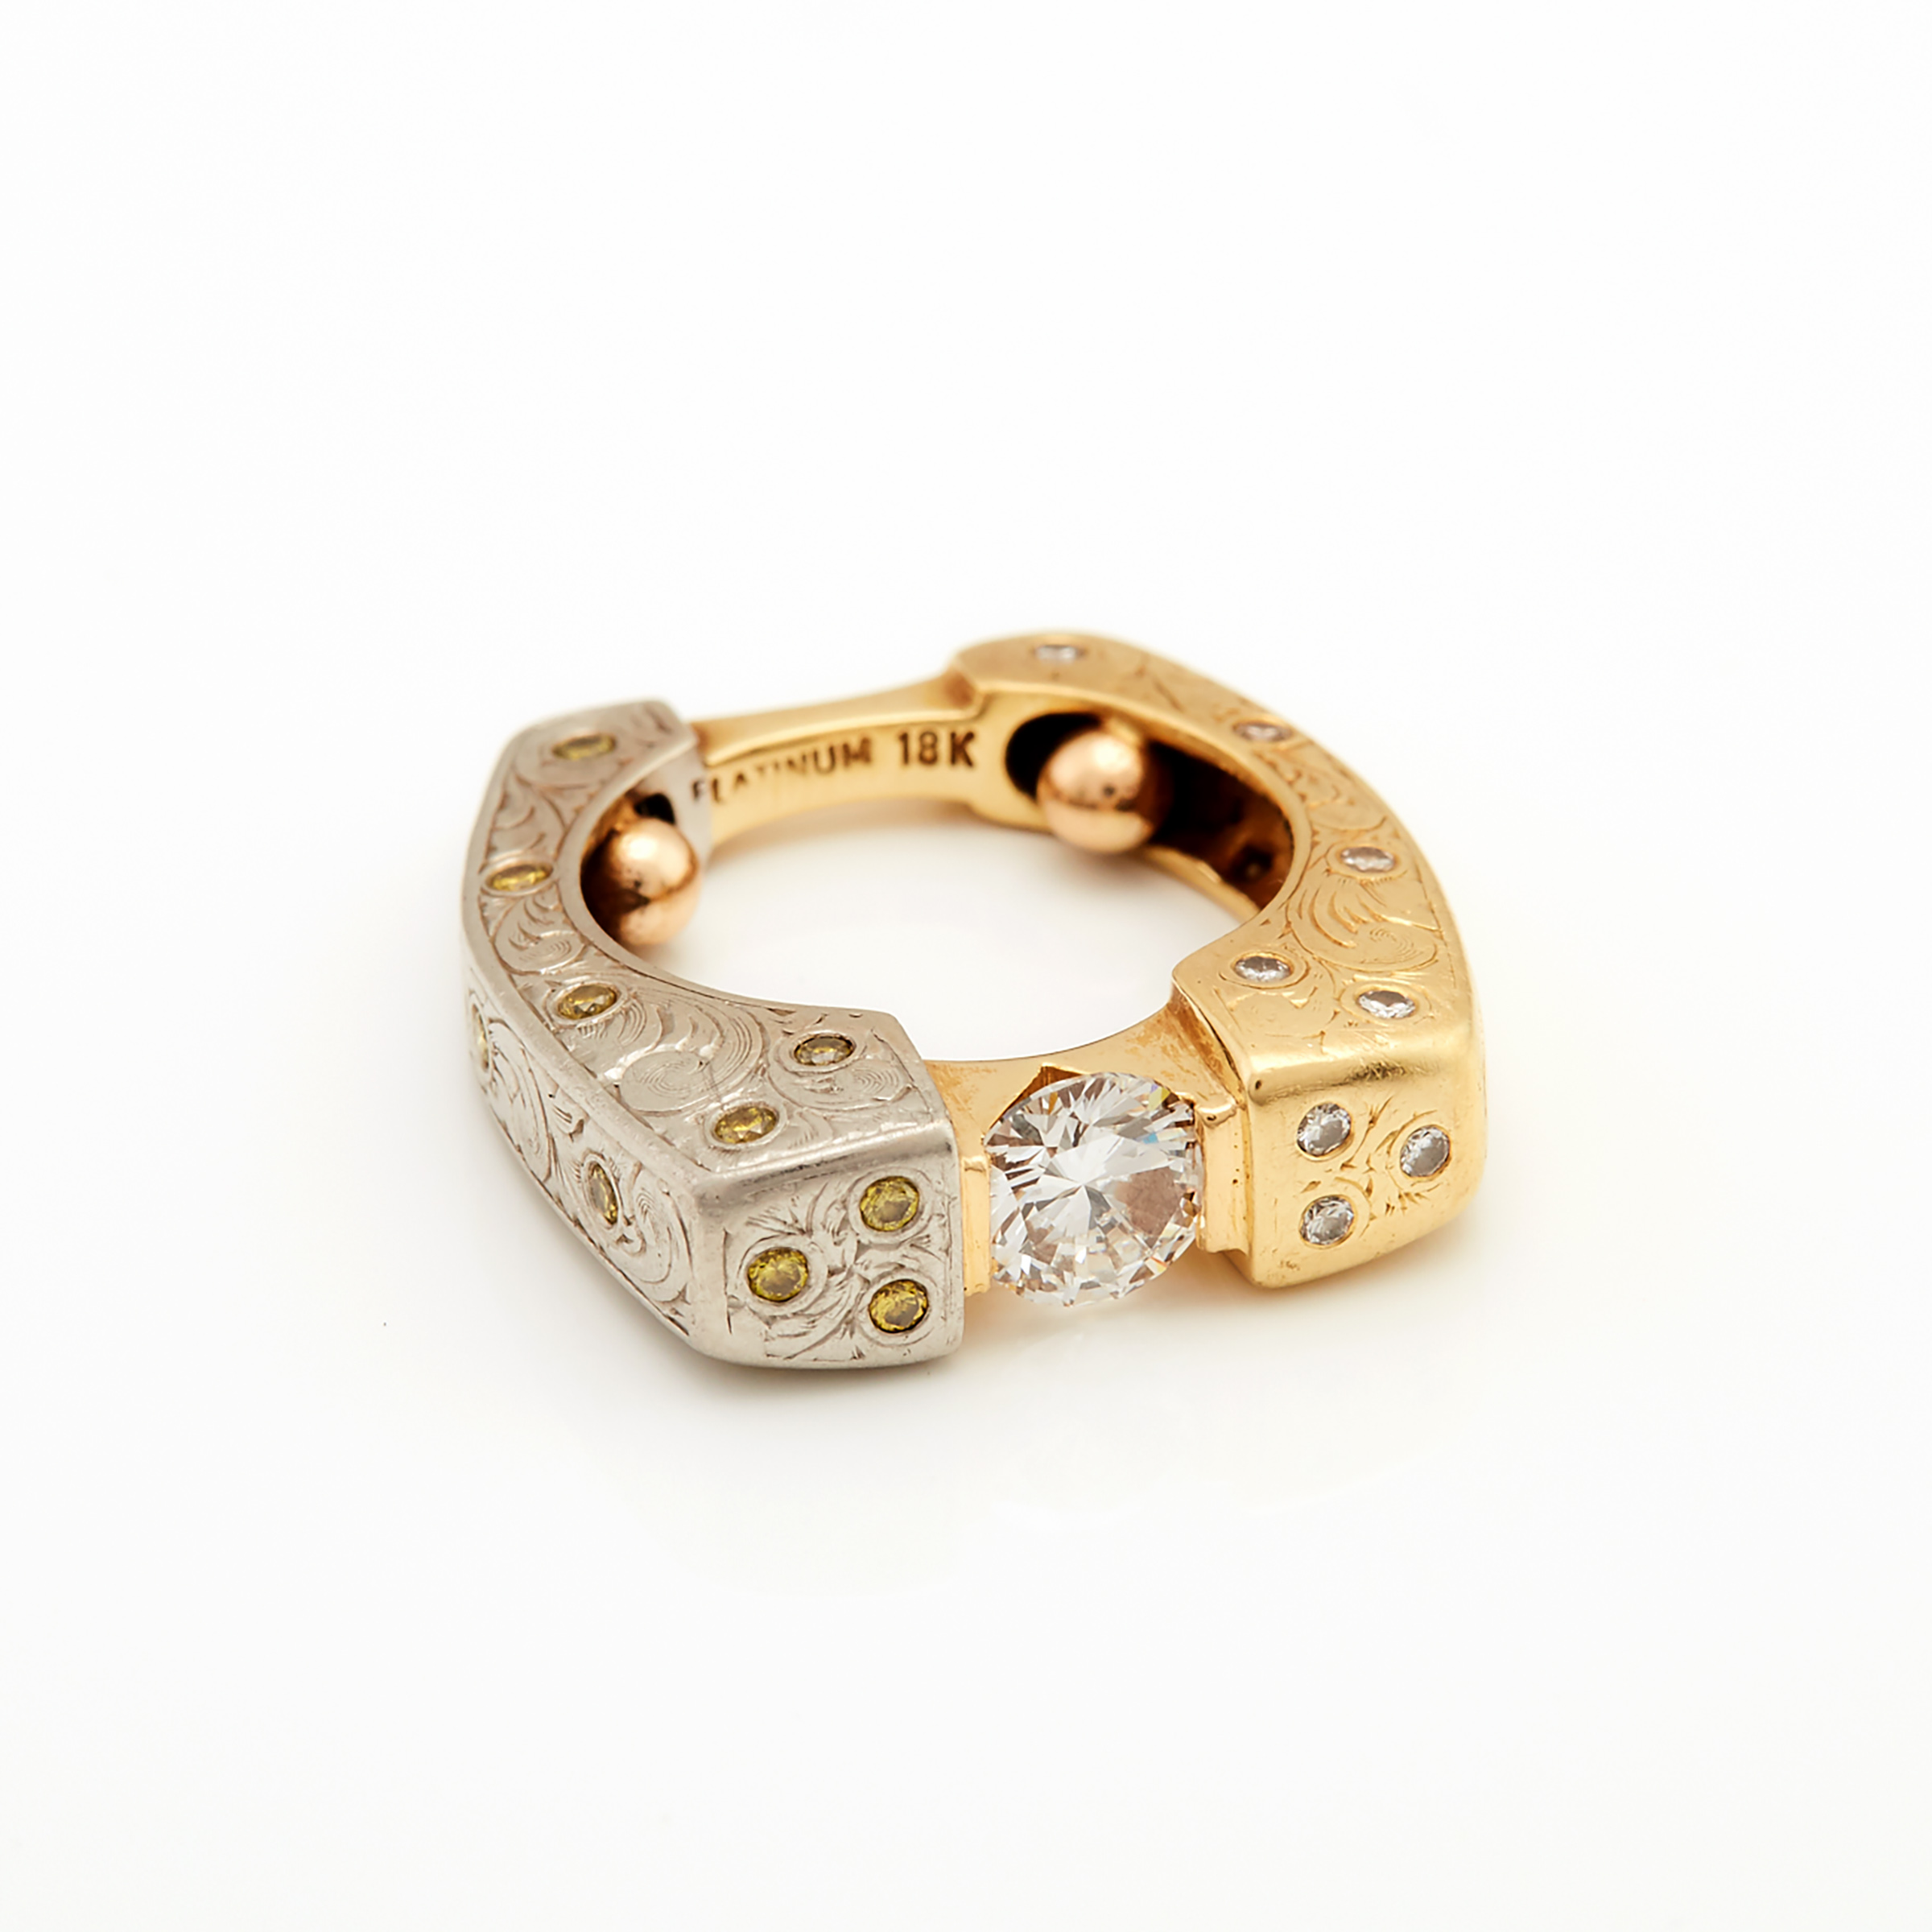 Shelly Purdy Canadian 18k Yellow Gold And Platinum Ring